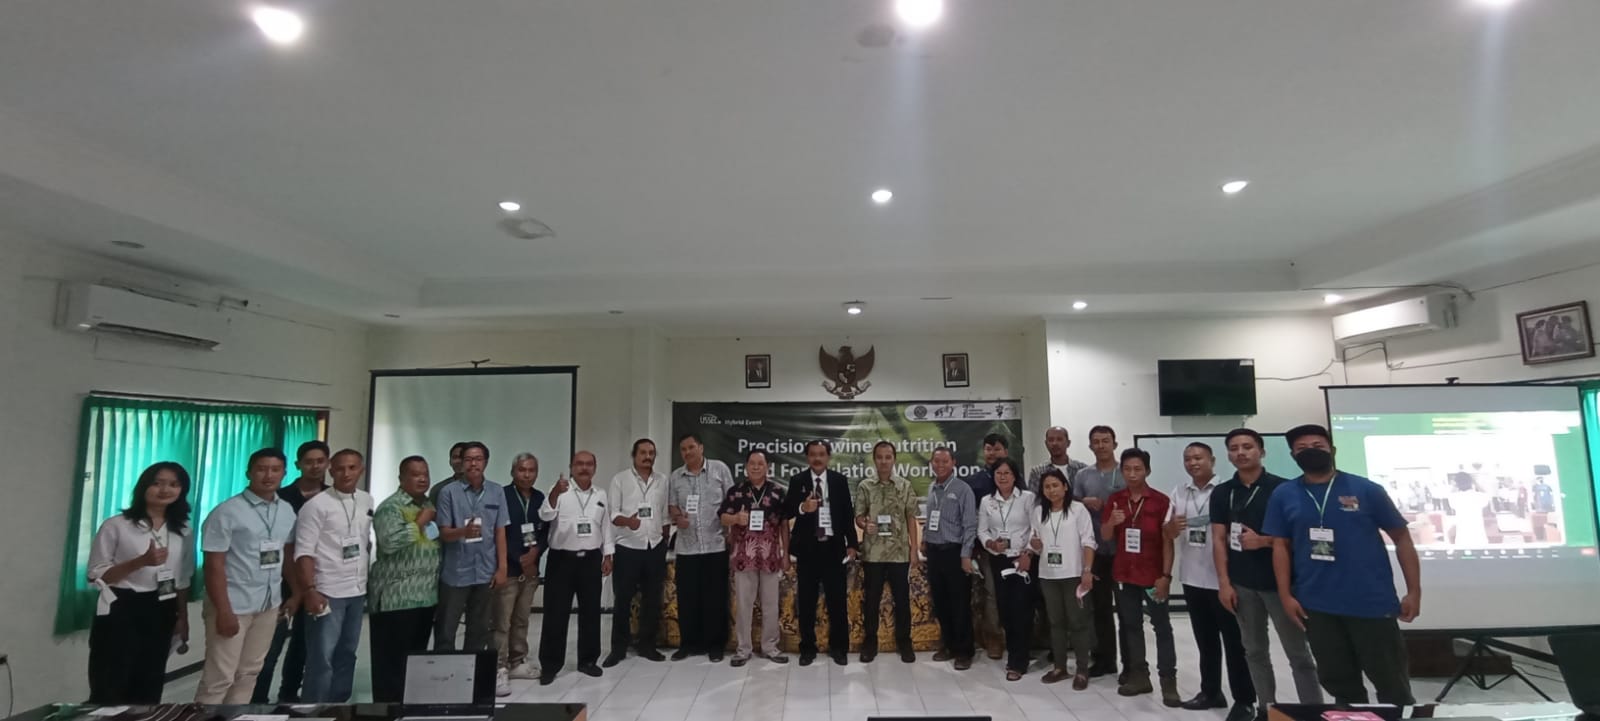 Faculty of Animal Husbandry, Udayana University Hosts the 2022 Precision Swine Nutrition and Feed Formulation Workshop in Indonesia